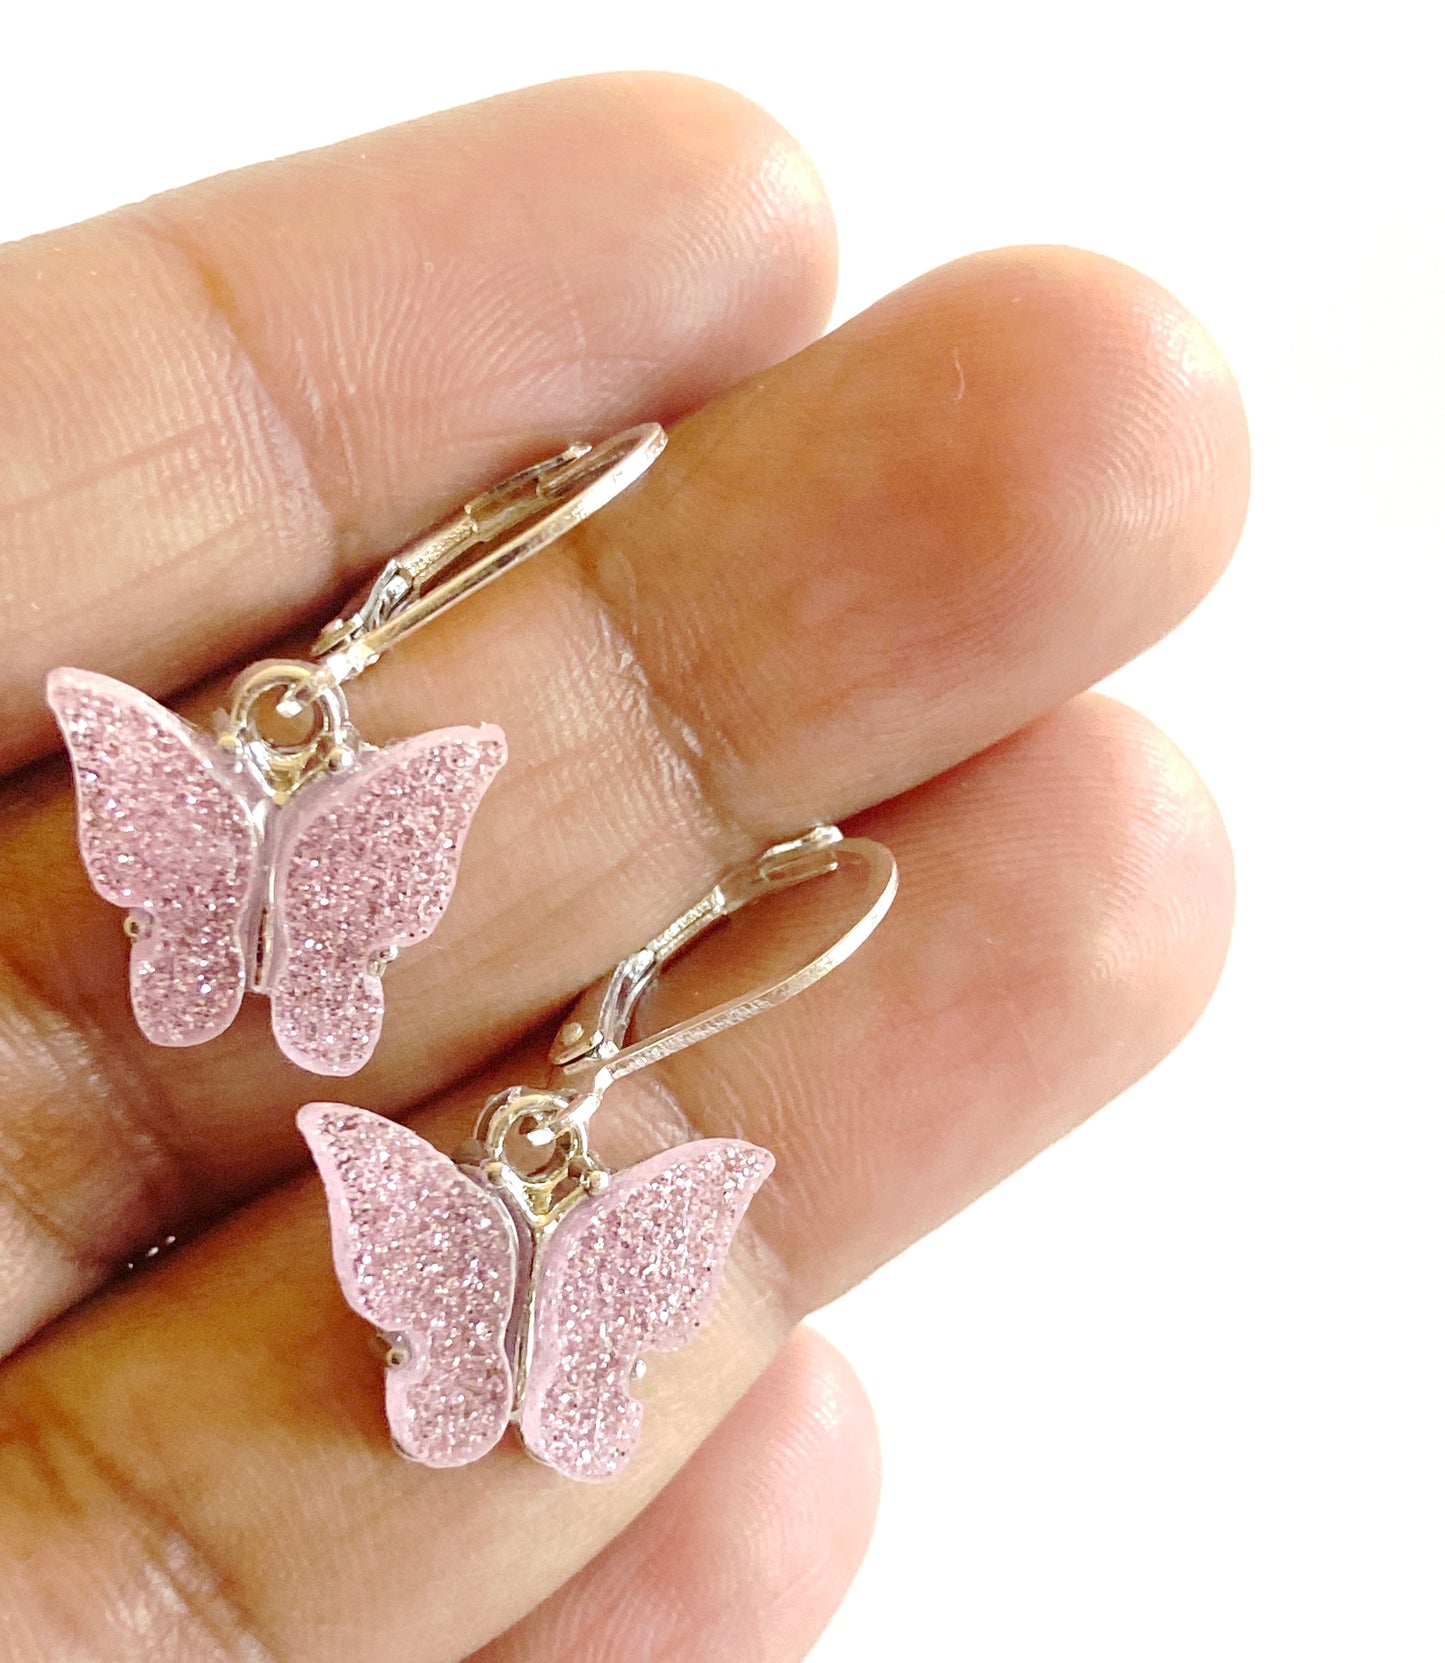 Sparkly Butterfly charm earring